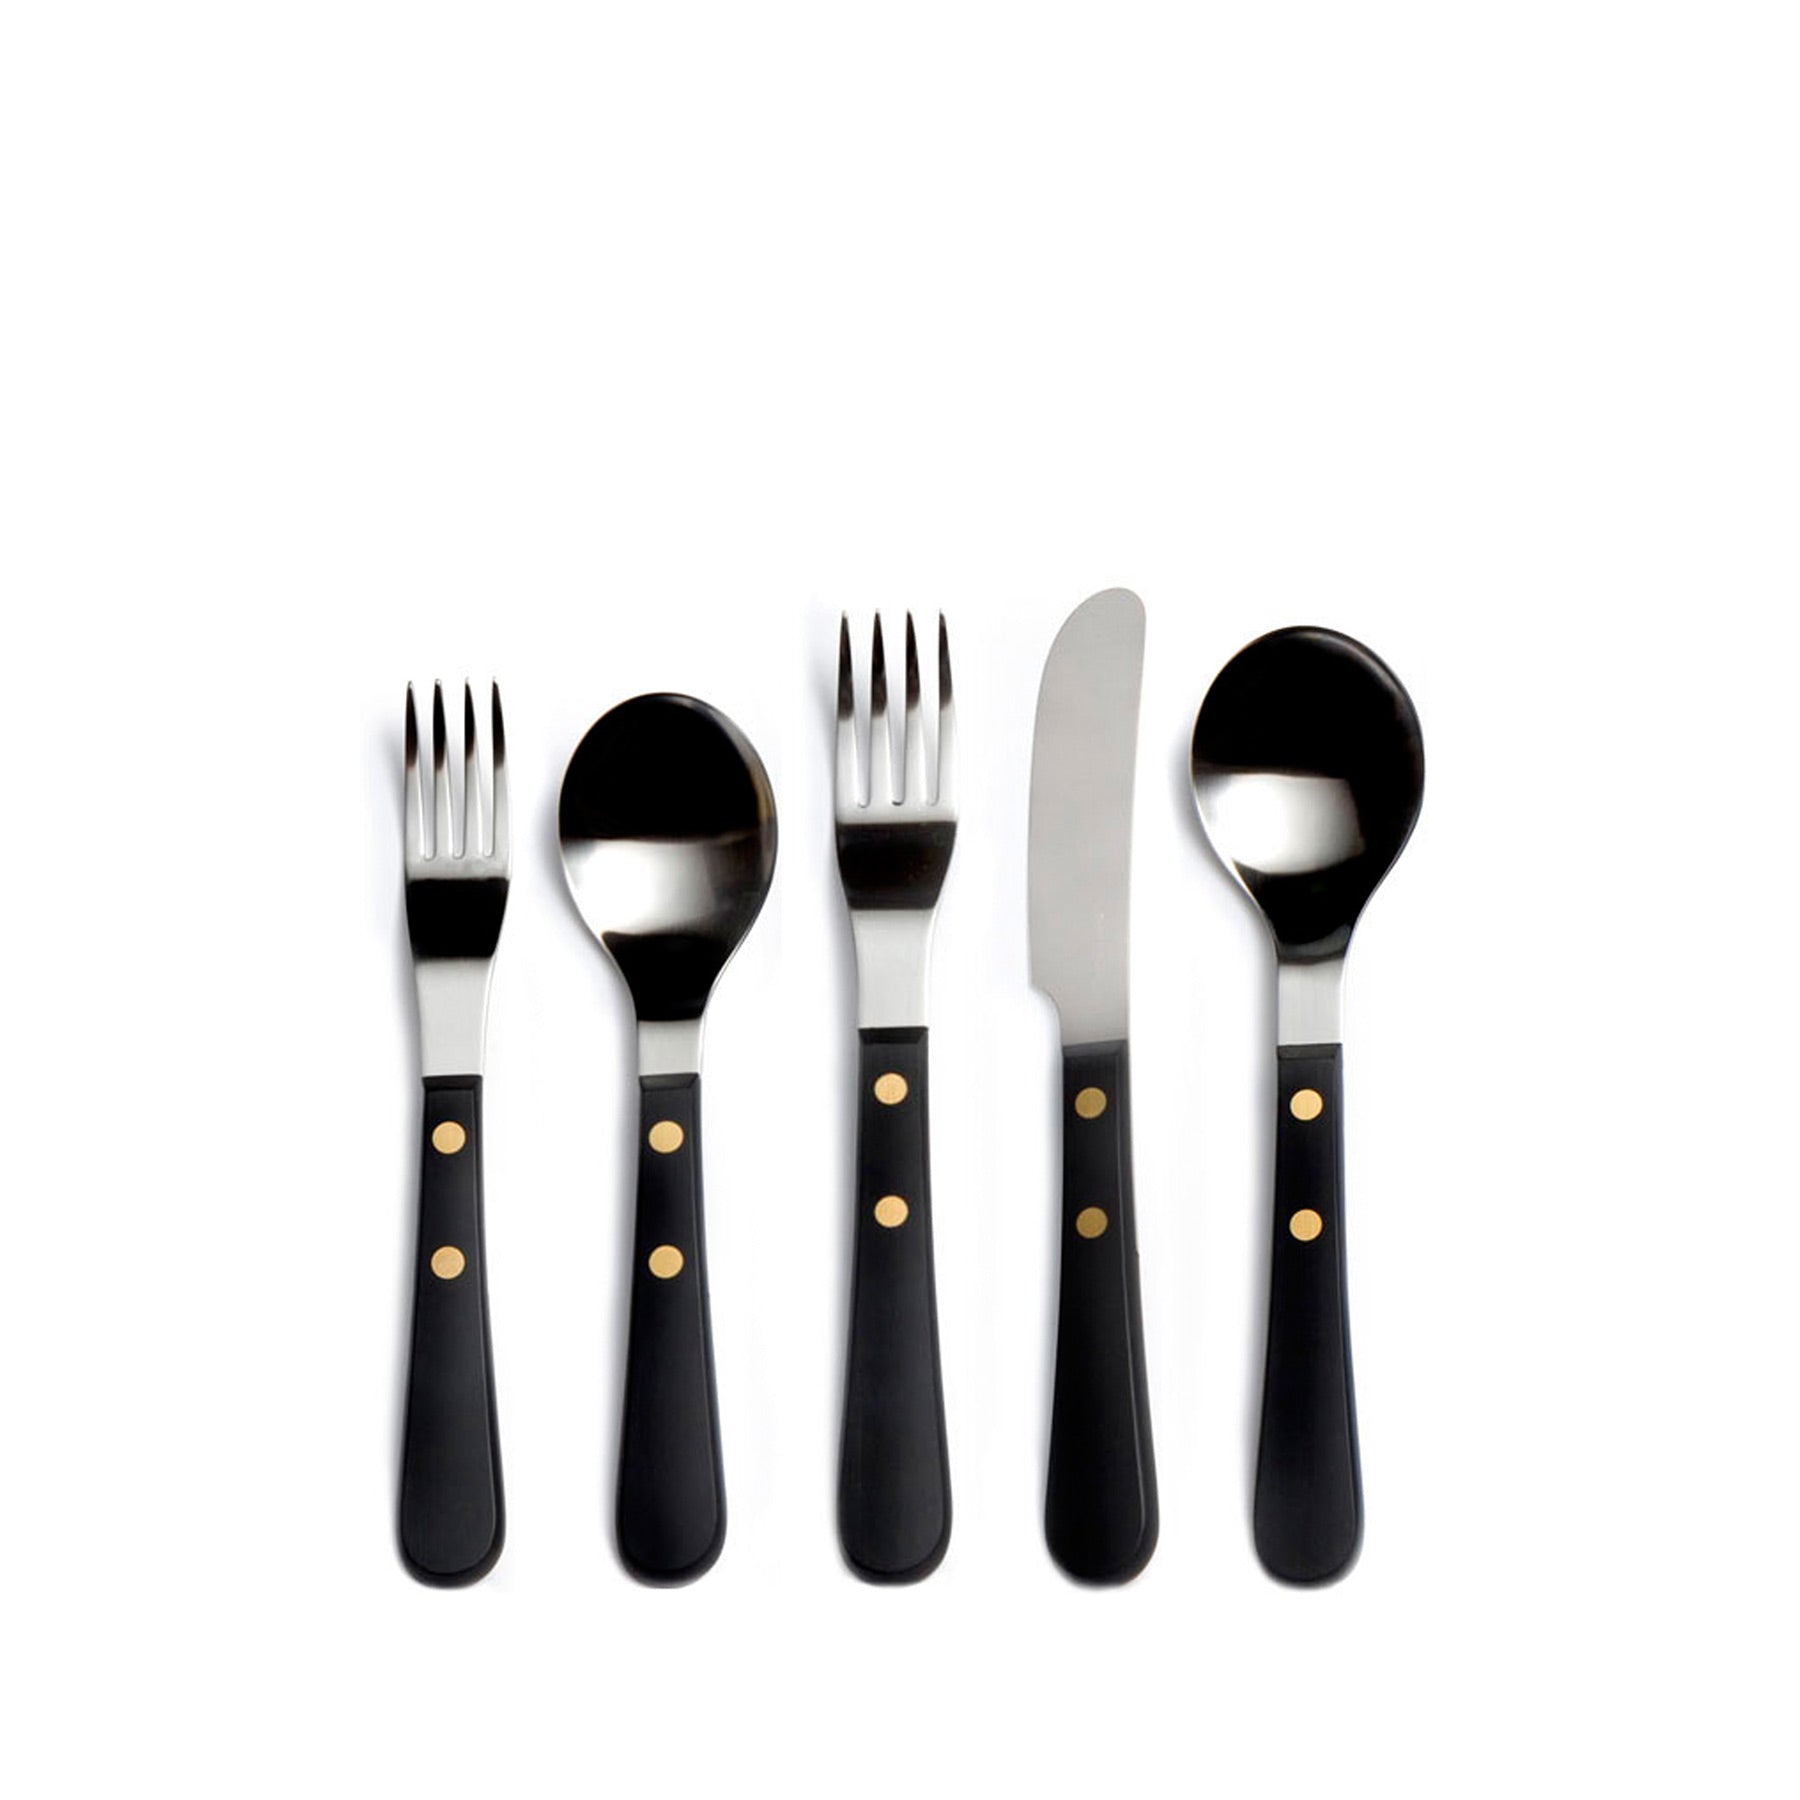 Provencal Flatware in Black (5 piece setting) Zoom Image 1